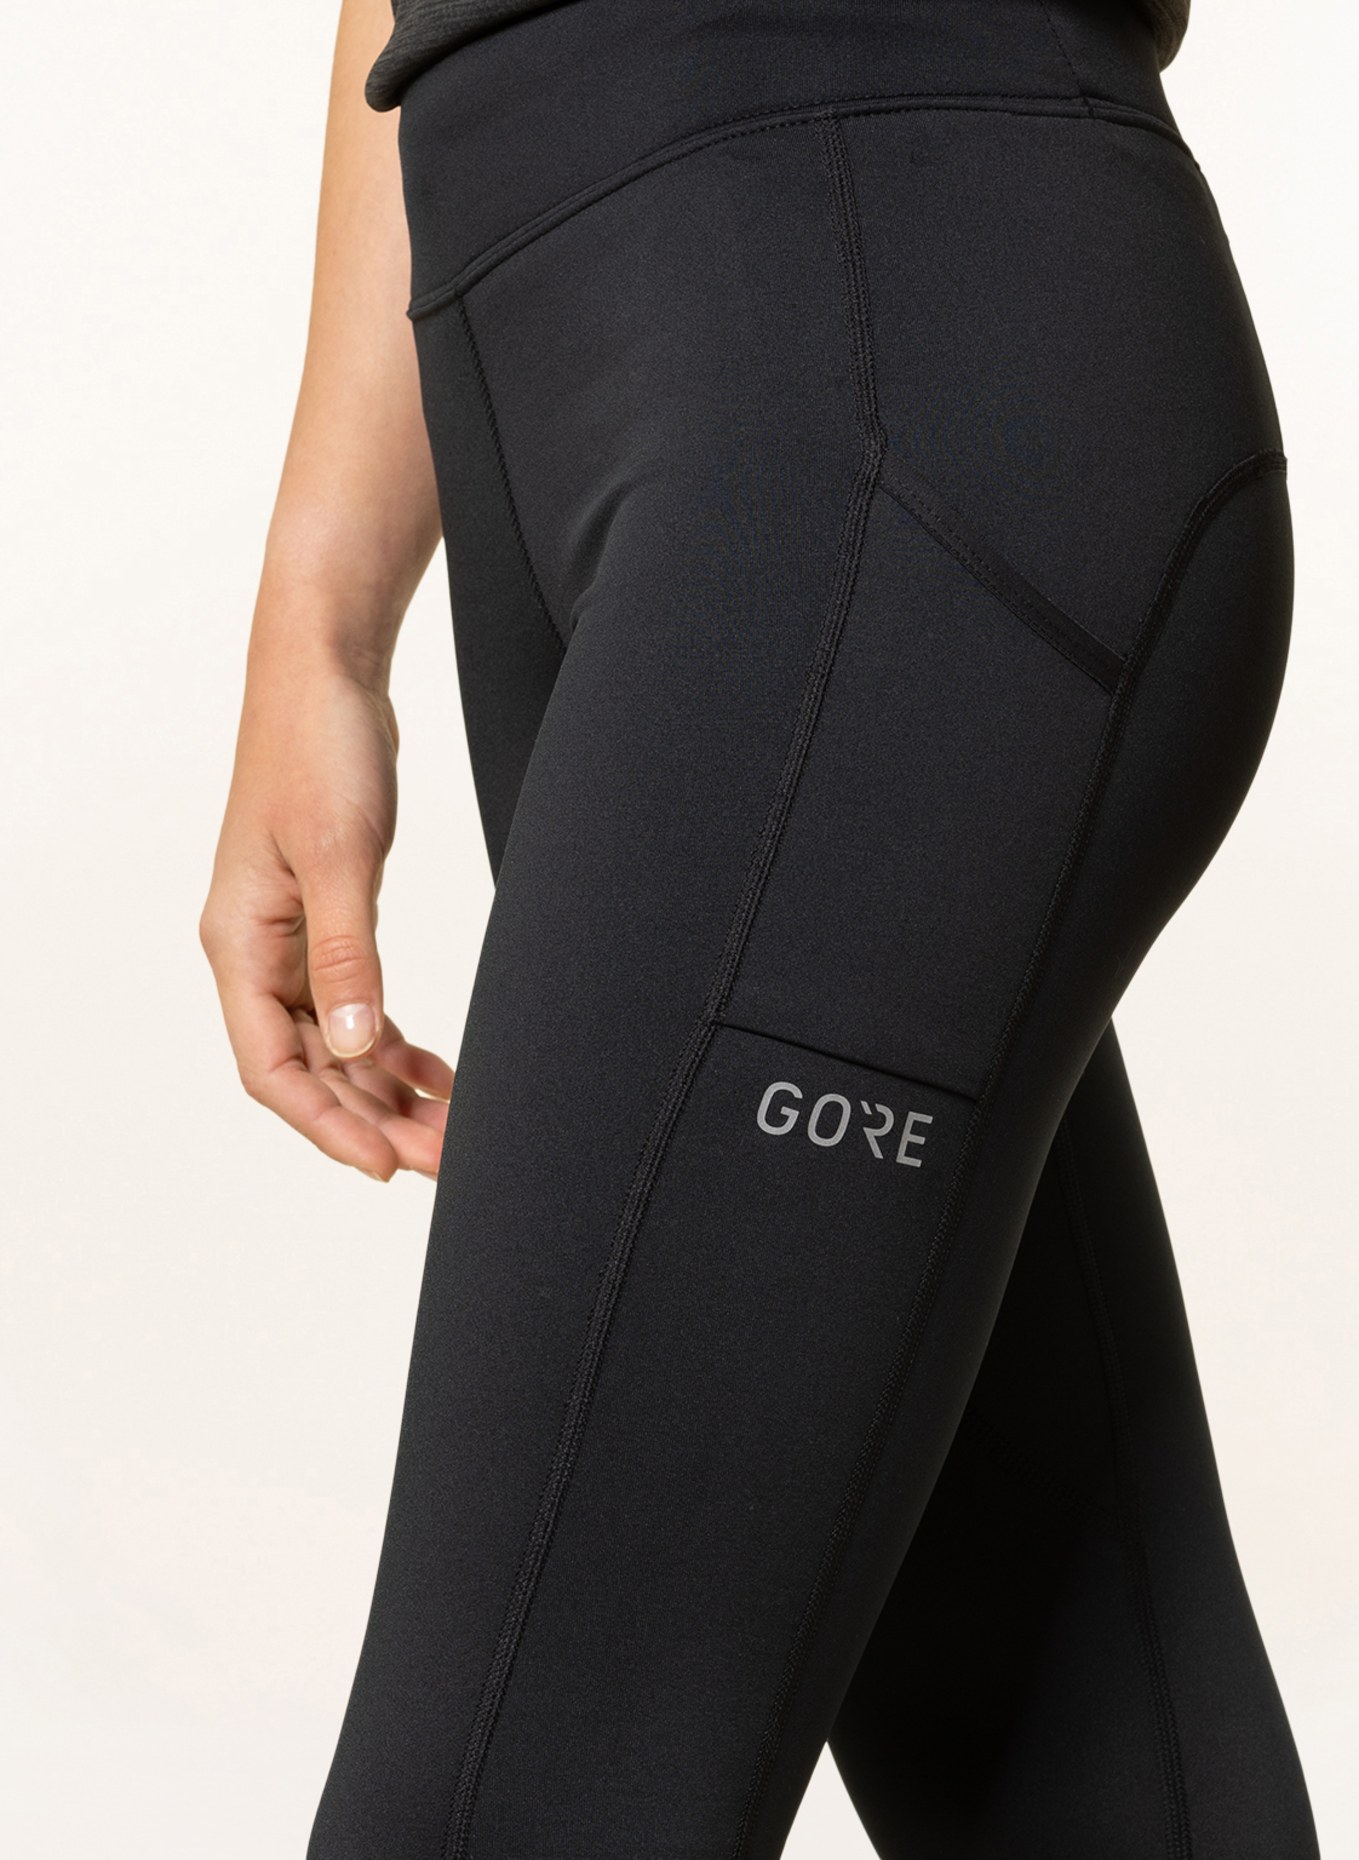 GORE Wear R3 Partial Gore Windstopper Tights - Running trousers